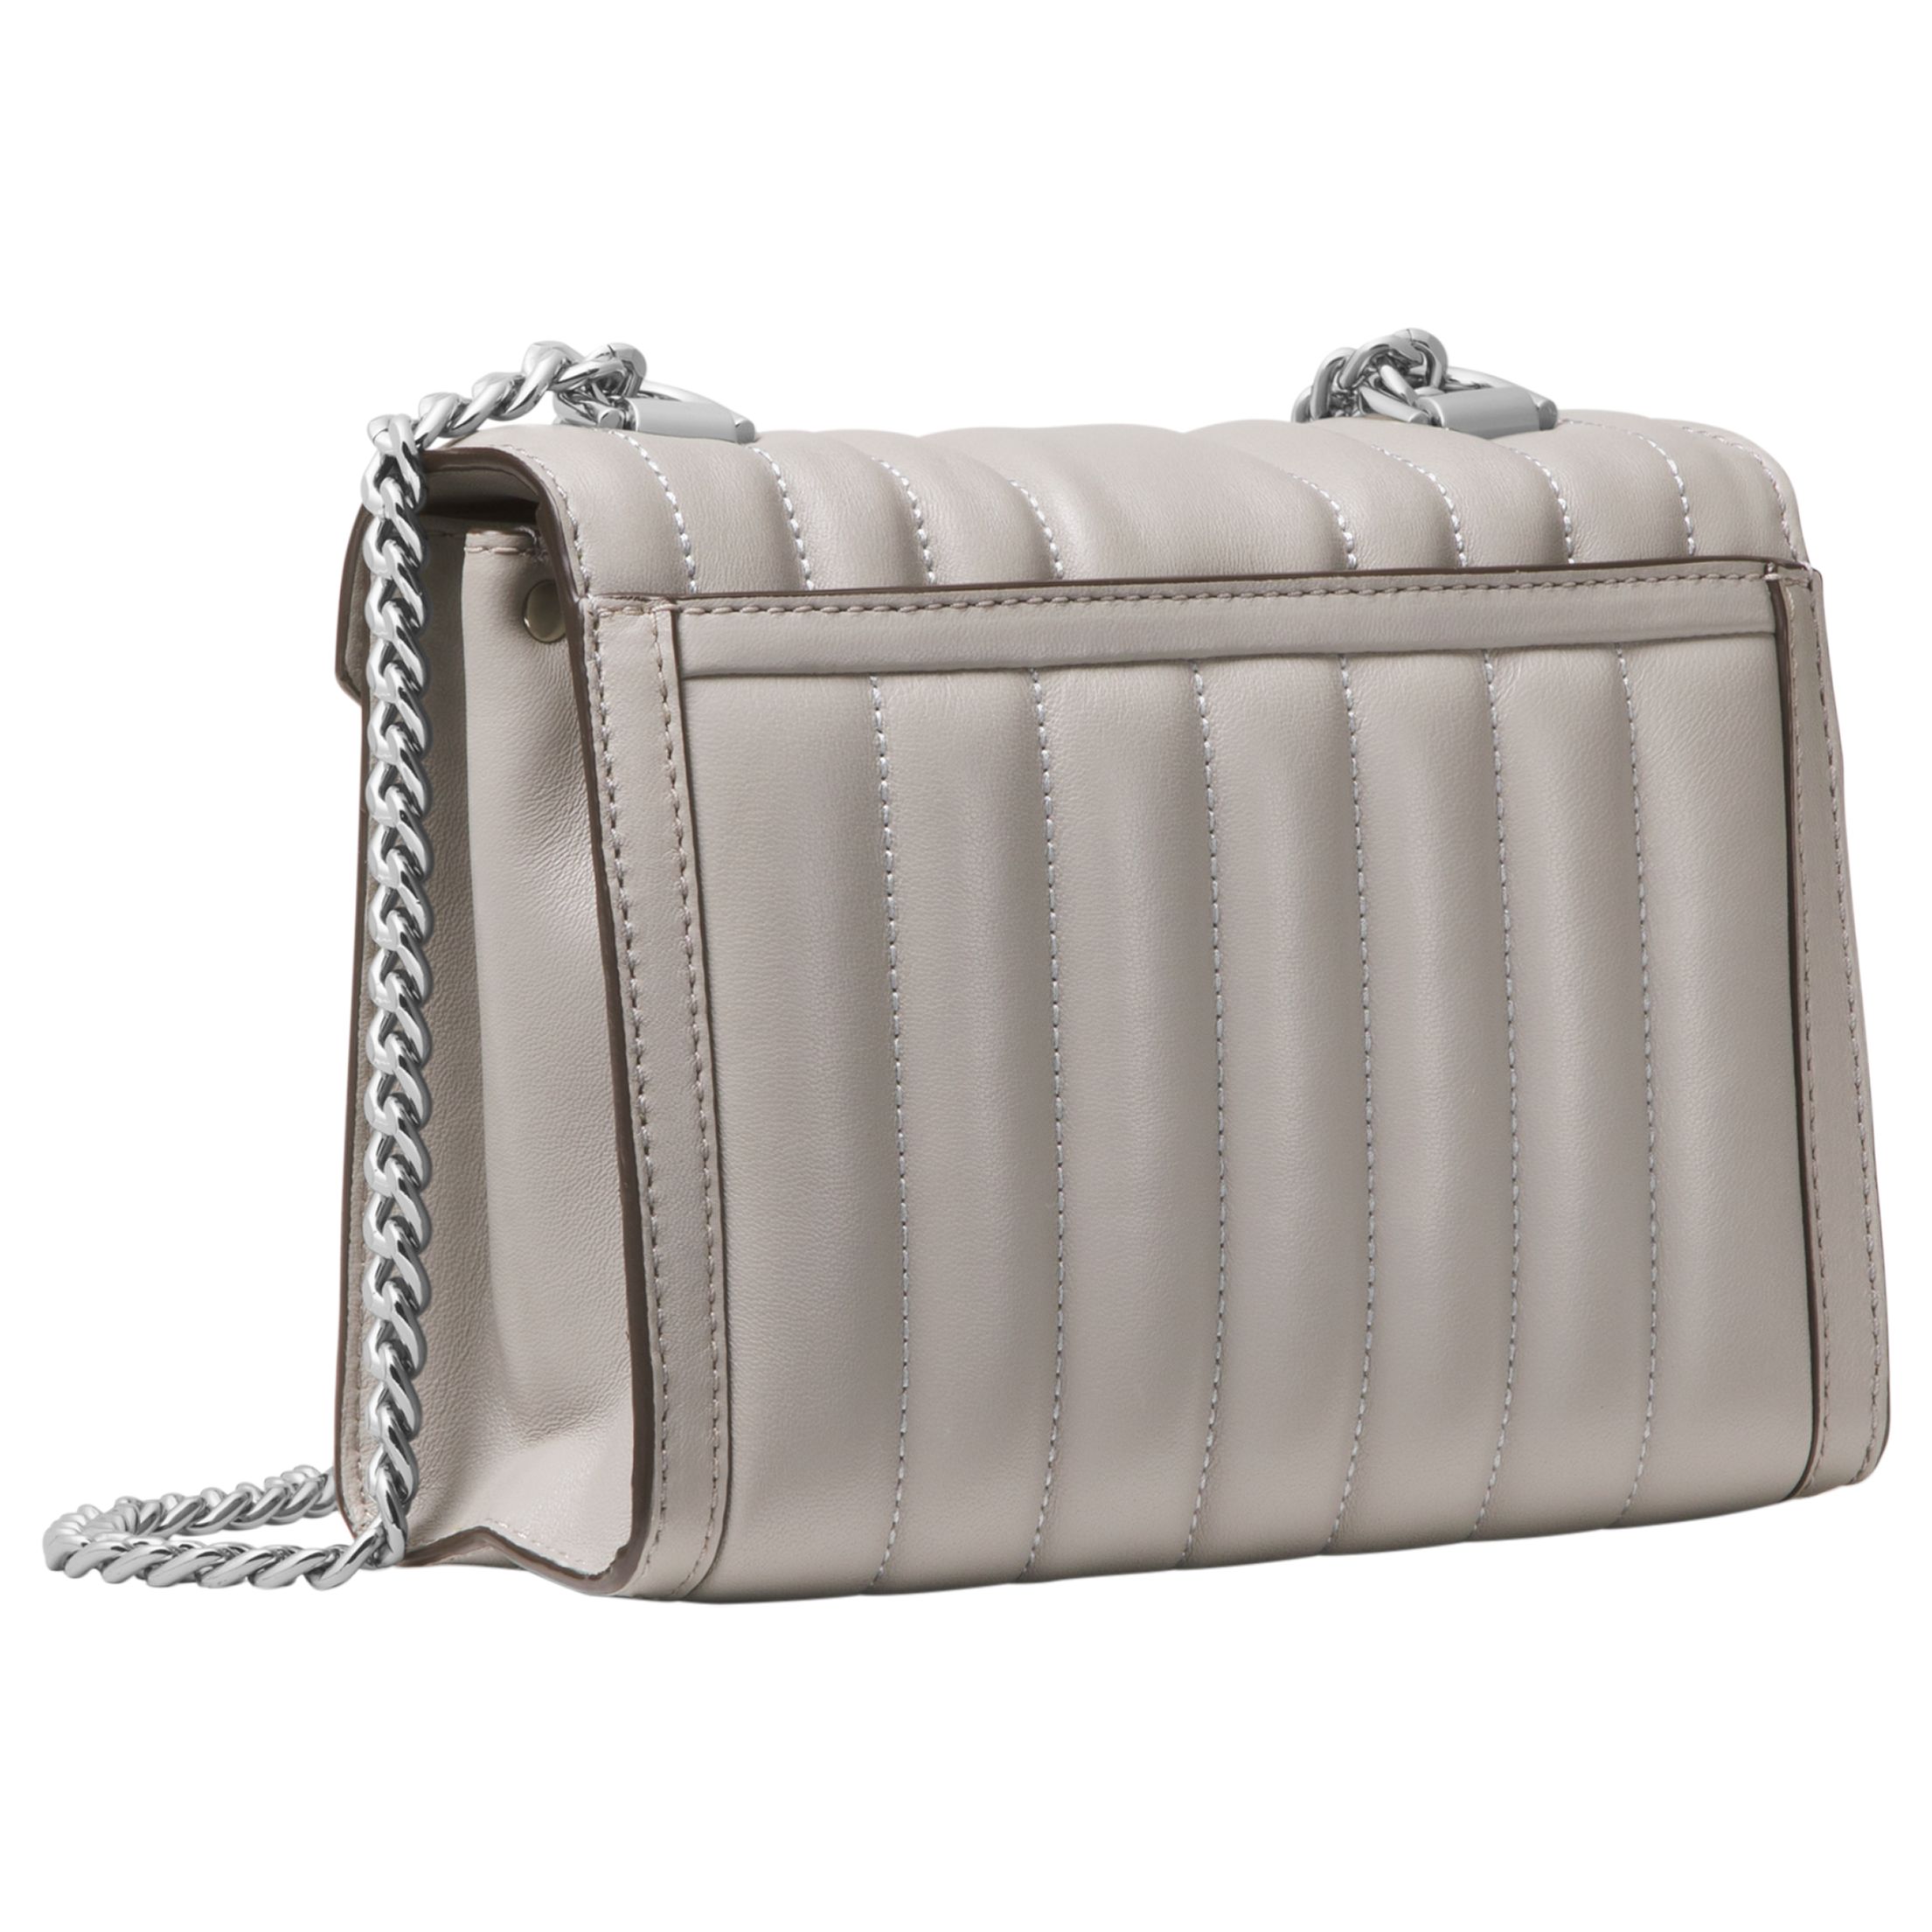 MICHAEL Michael Kors Whitney Small Quilted Leather Shoulder Bag, Pearl Grey at John Lewis & Partners